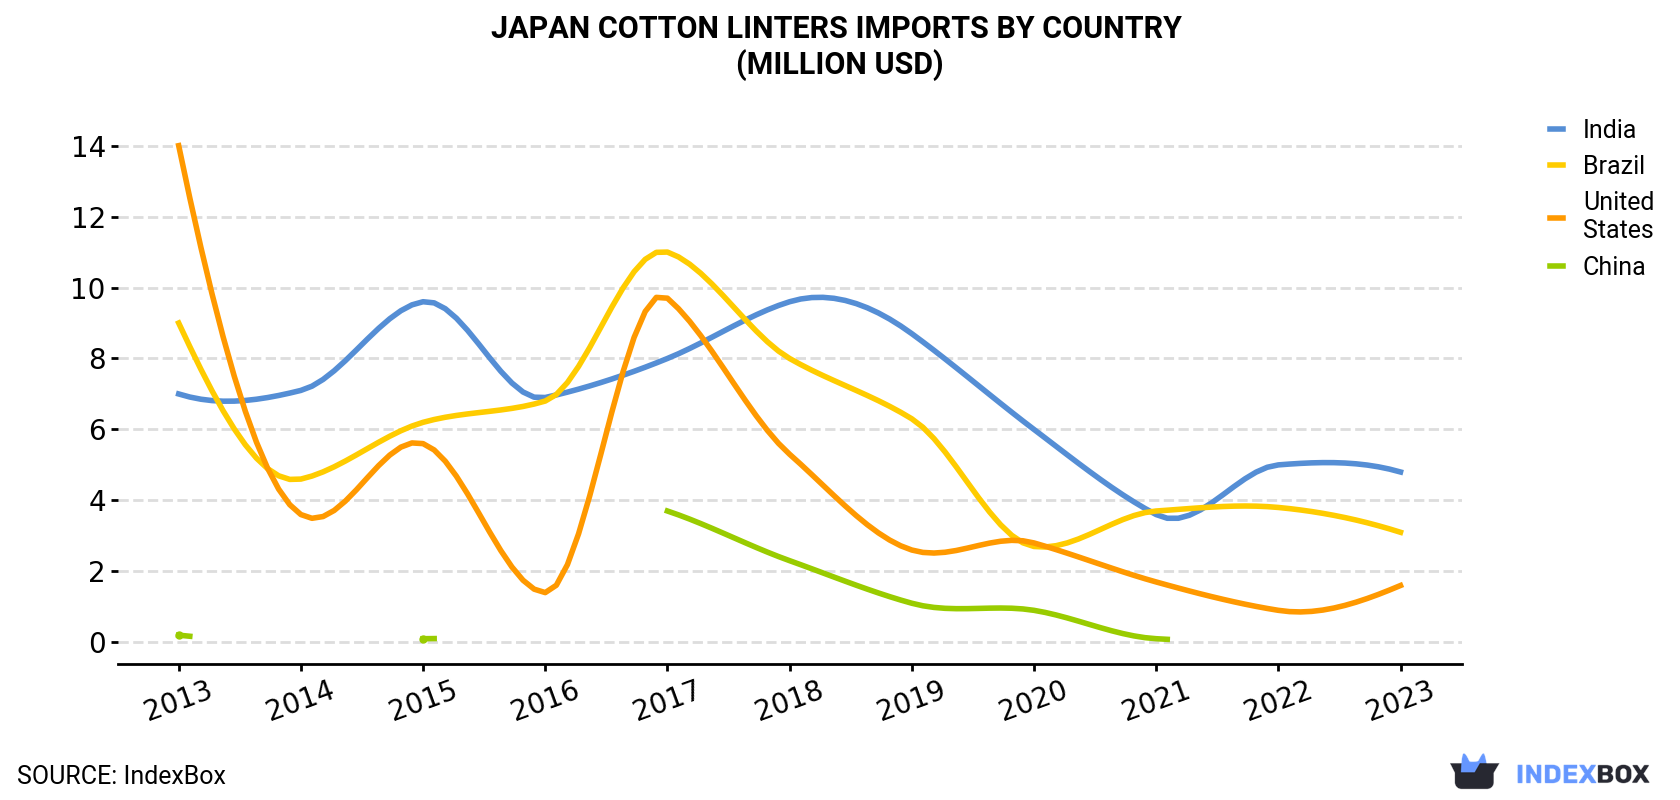 Japan Cotton Linters Imports By Country (Million USD)